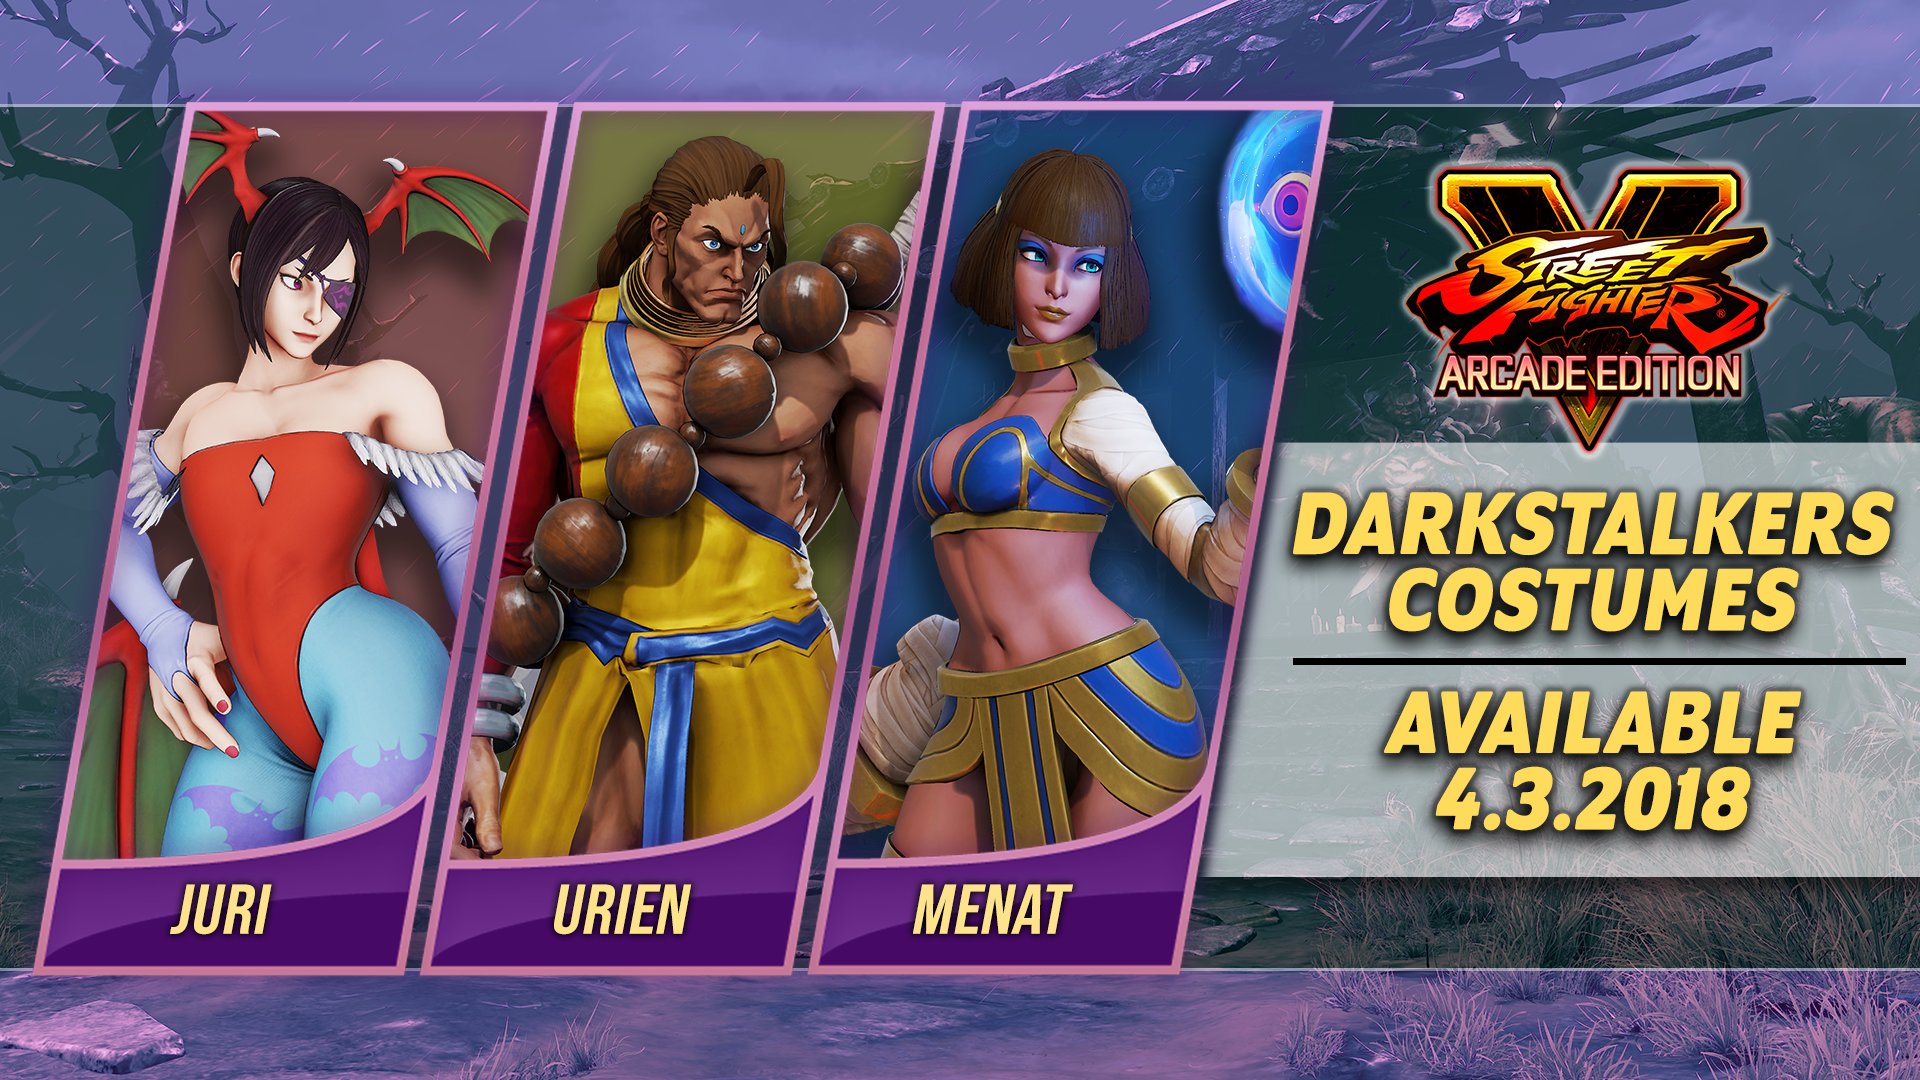 Cloak yourself in darkness with Darkstalkers Costumes for Menat, Juri, and ...